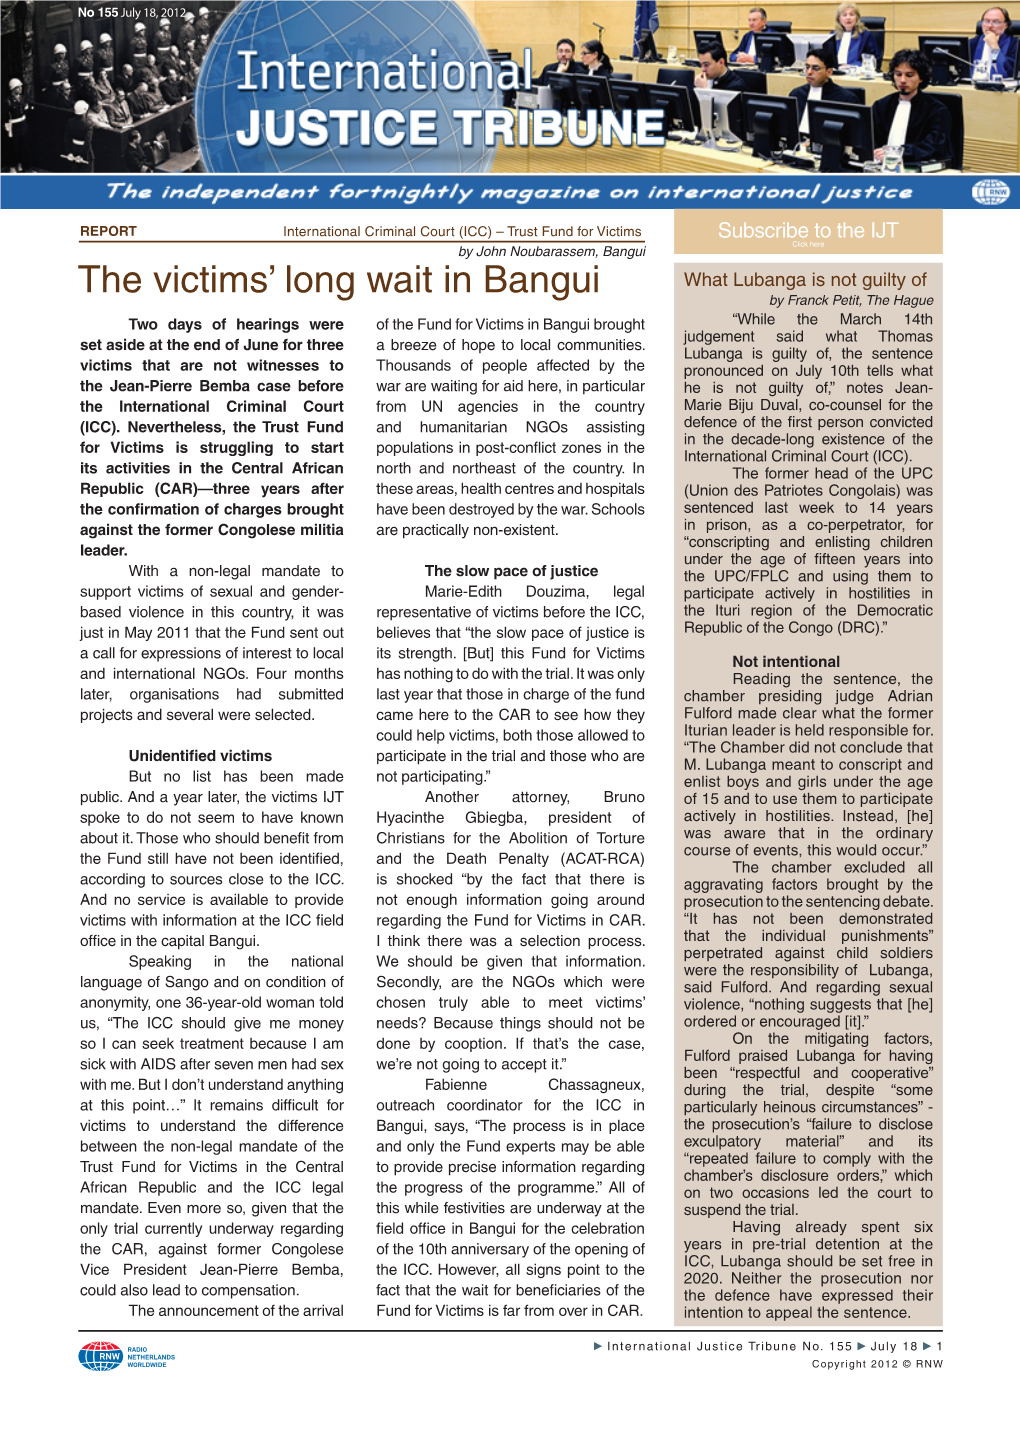 The Victims' Long Wait in Bangui